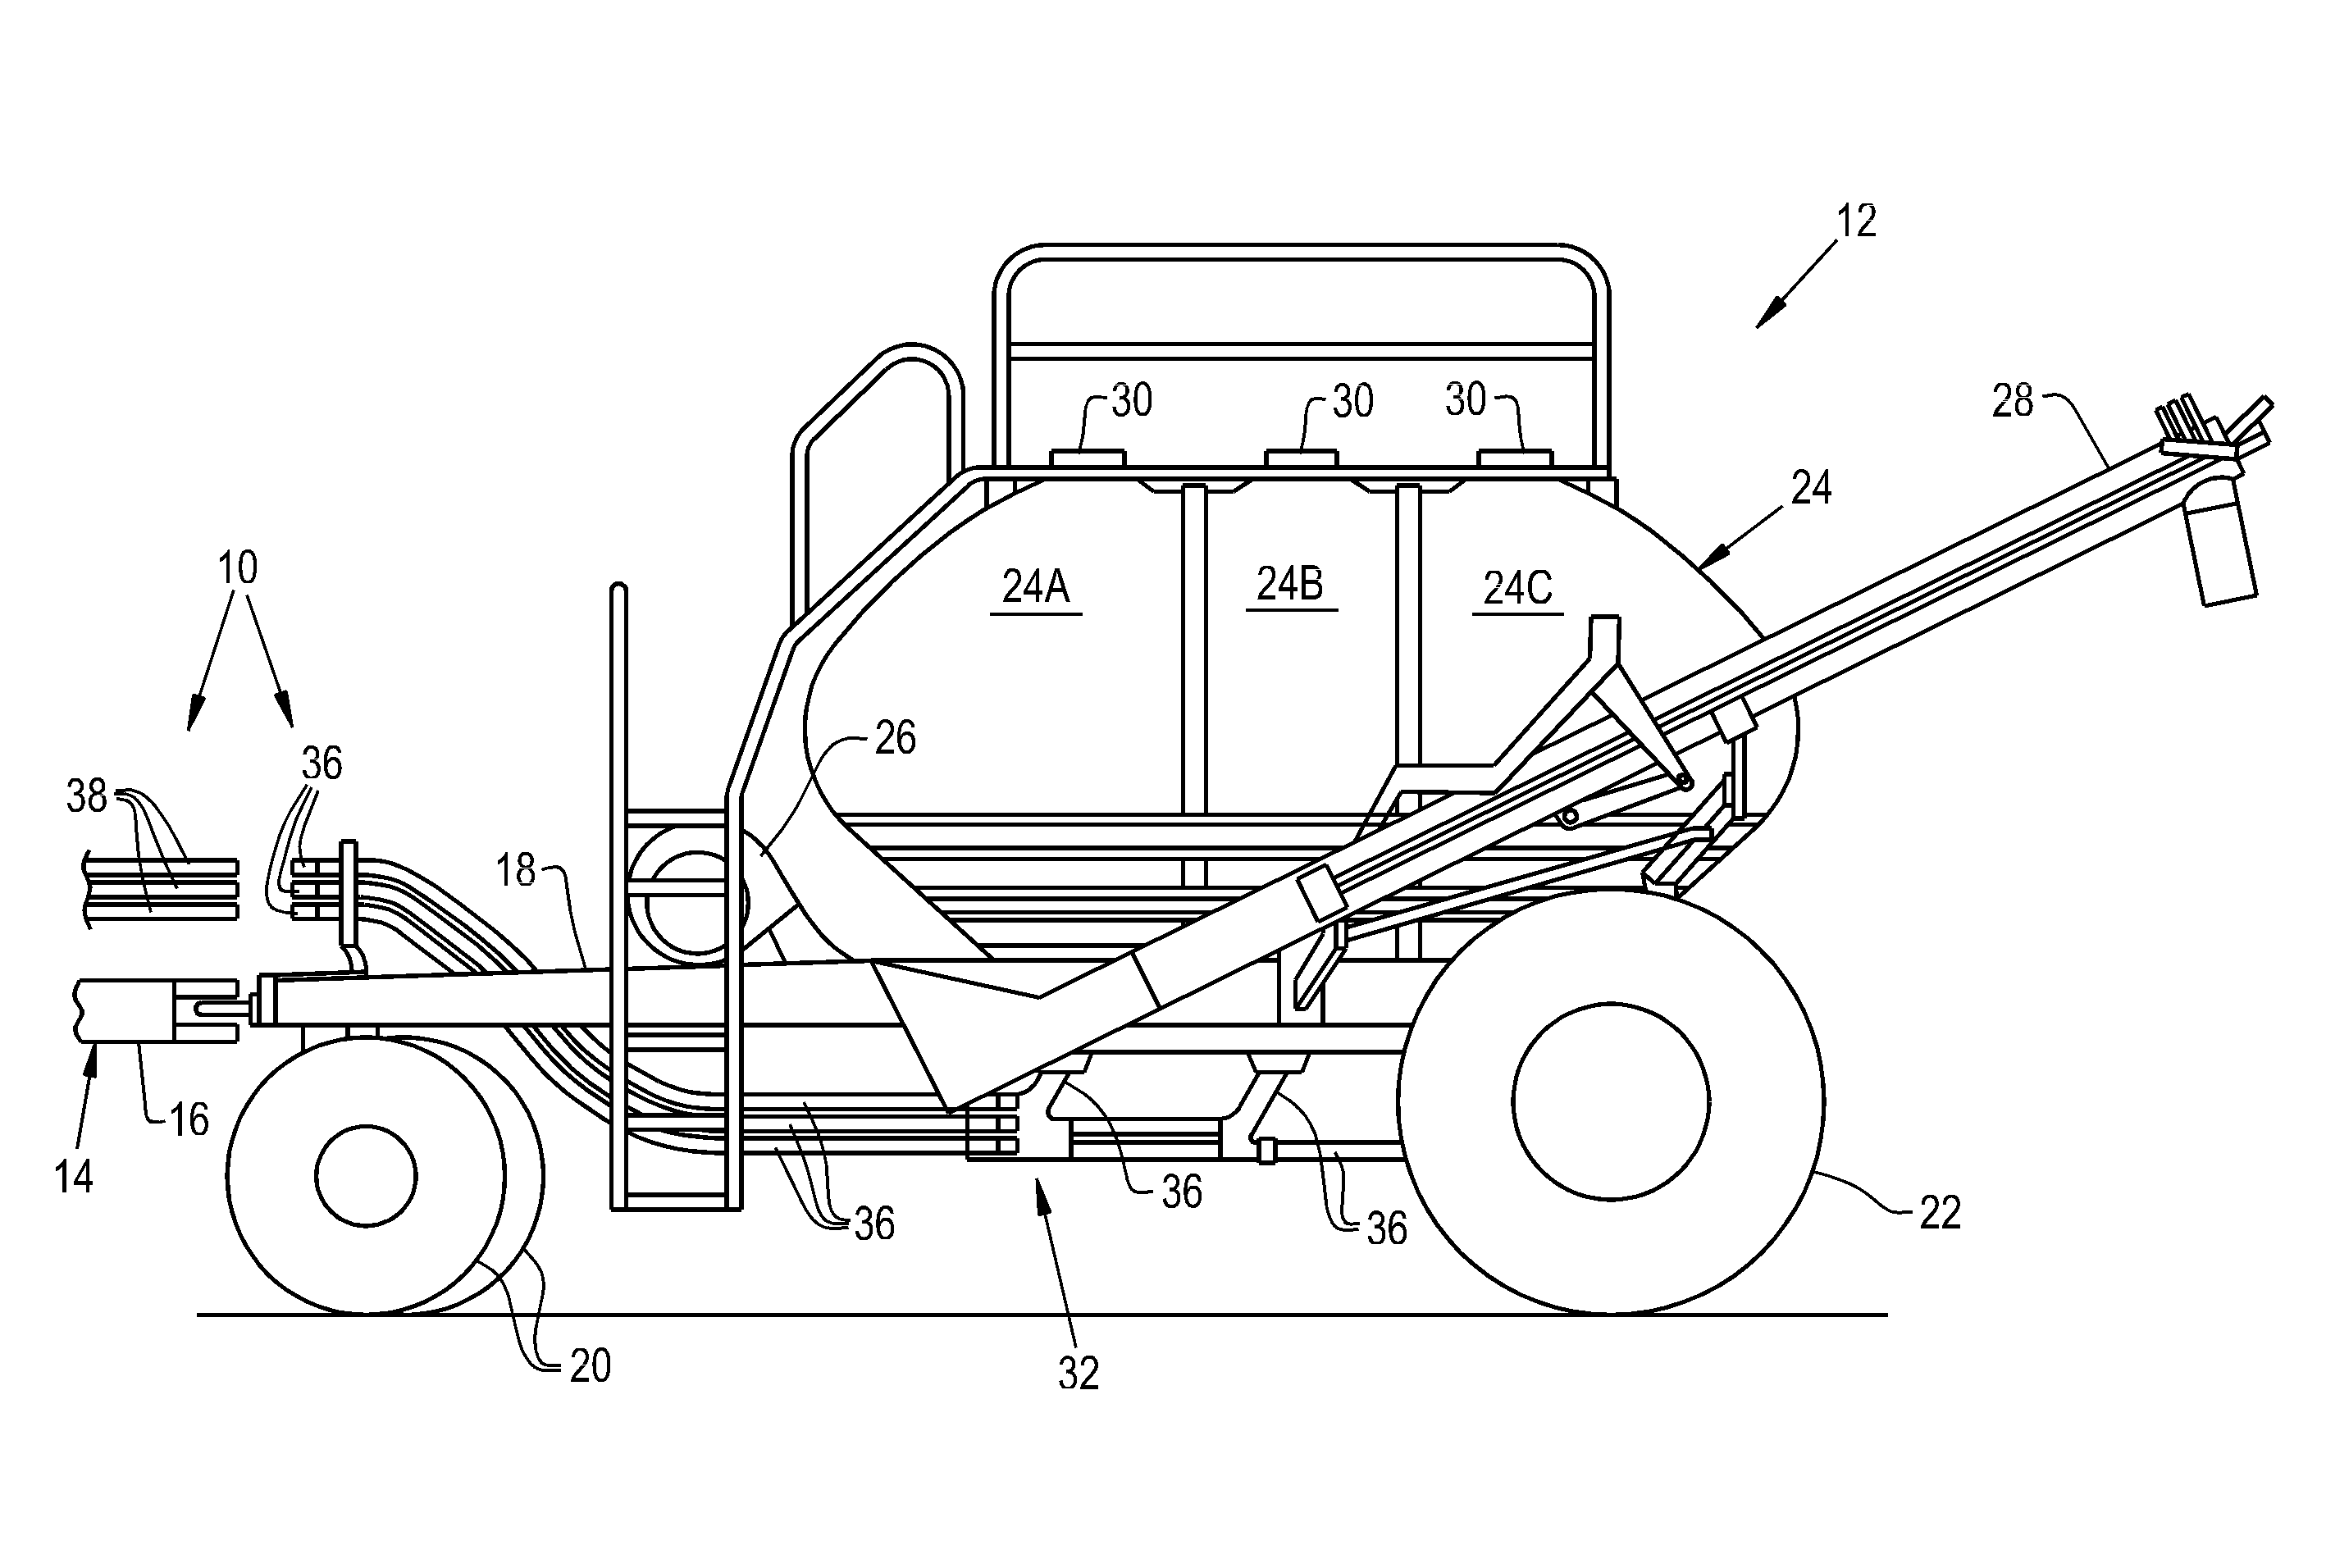 Semi-empirical mass flow model and calibration method for undeveloped flow regions in an air seeder